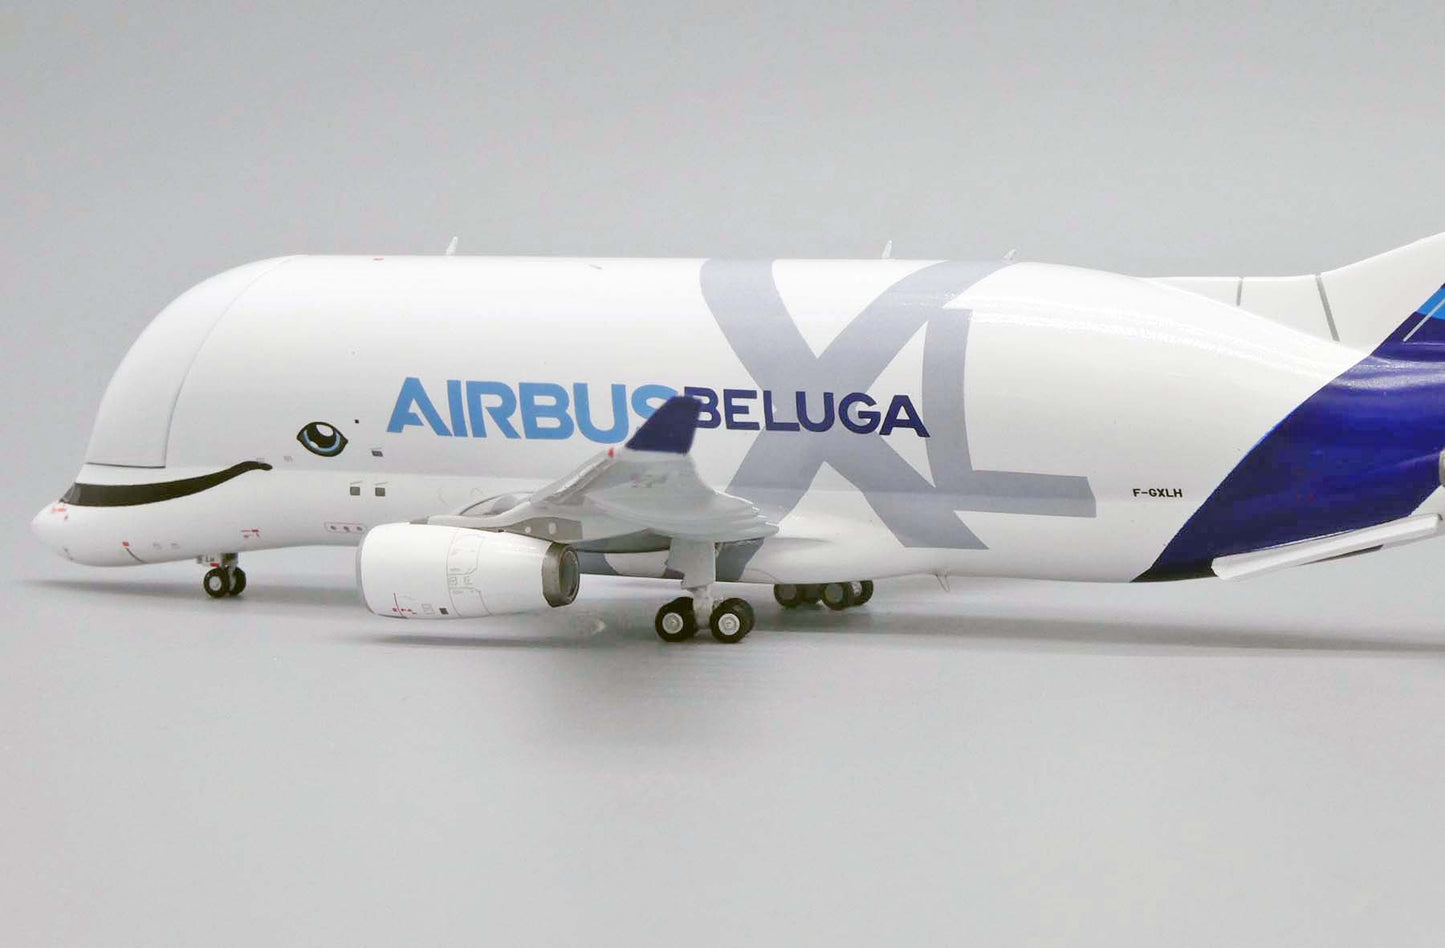 1:400 JC Wings Airbus House Colors Beluga XL "Interactive" F-GXLH LH4180